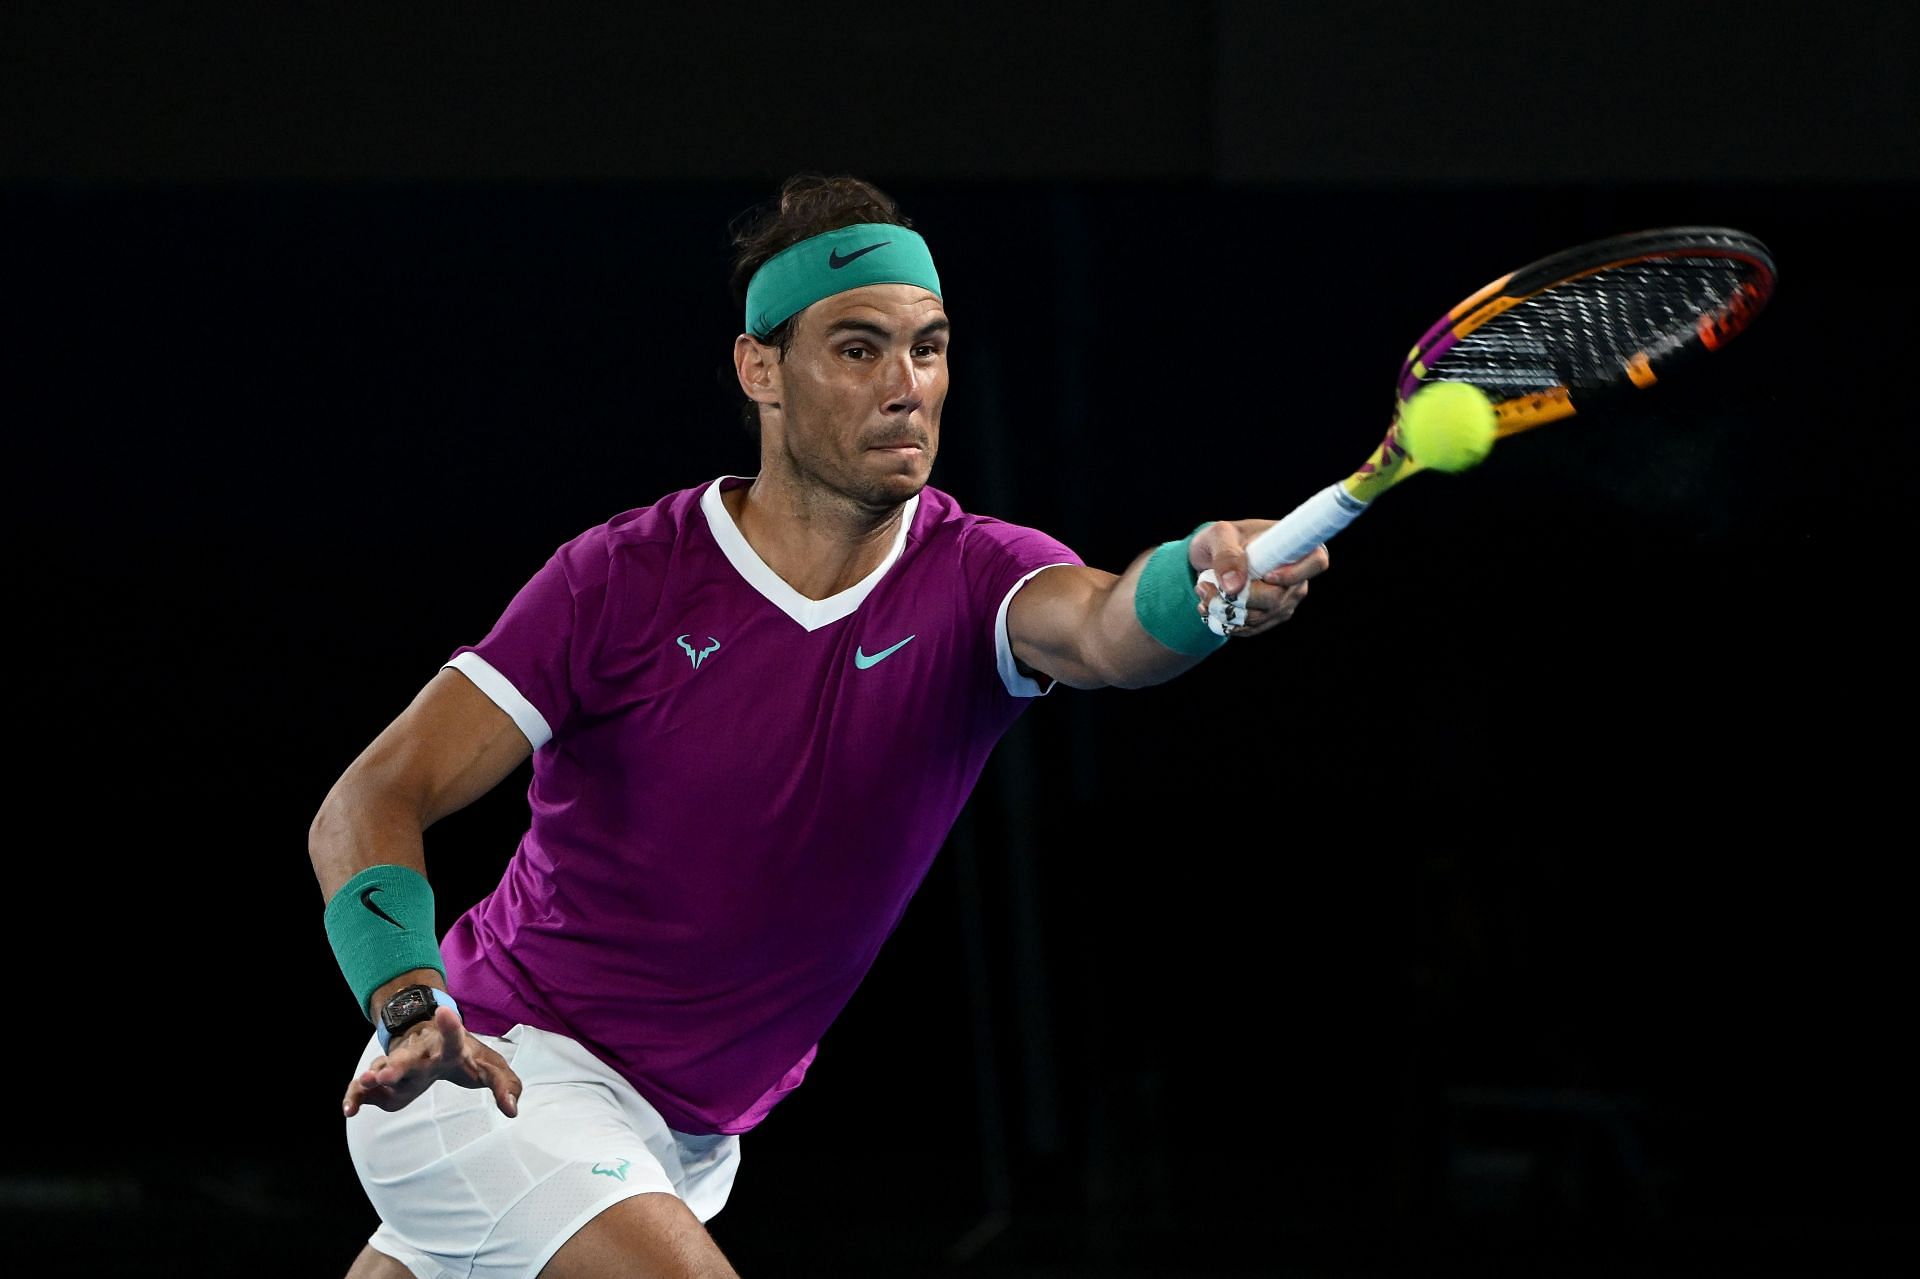 Rafael Nadal has now won 50 matches against Top-10 opponents at Grand Slams